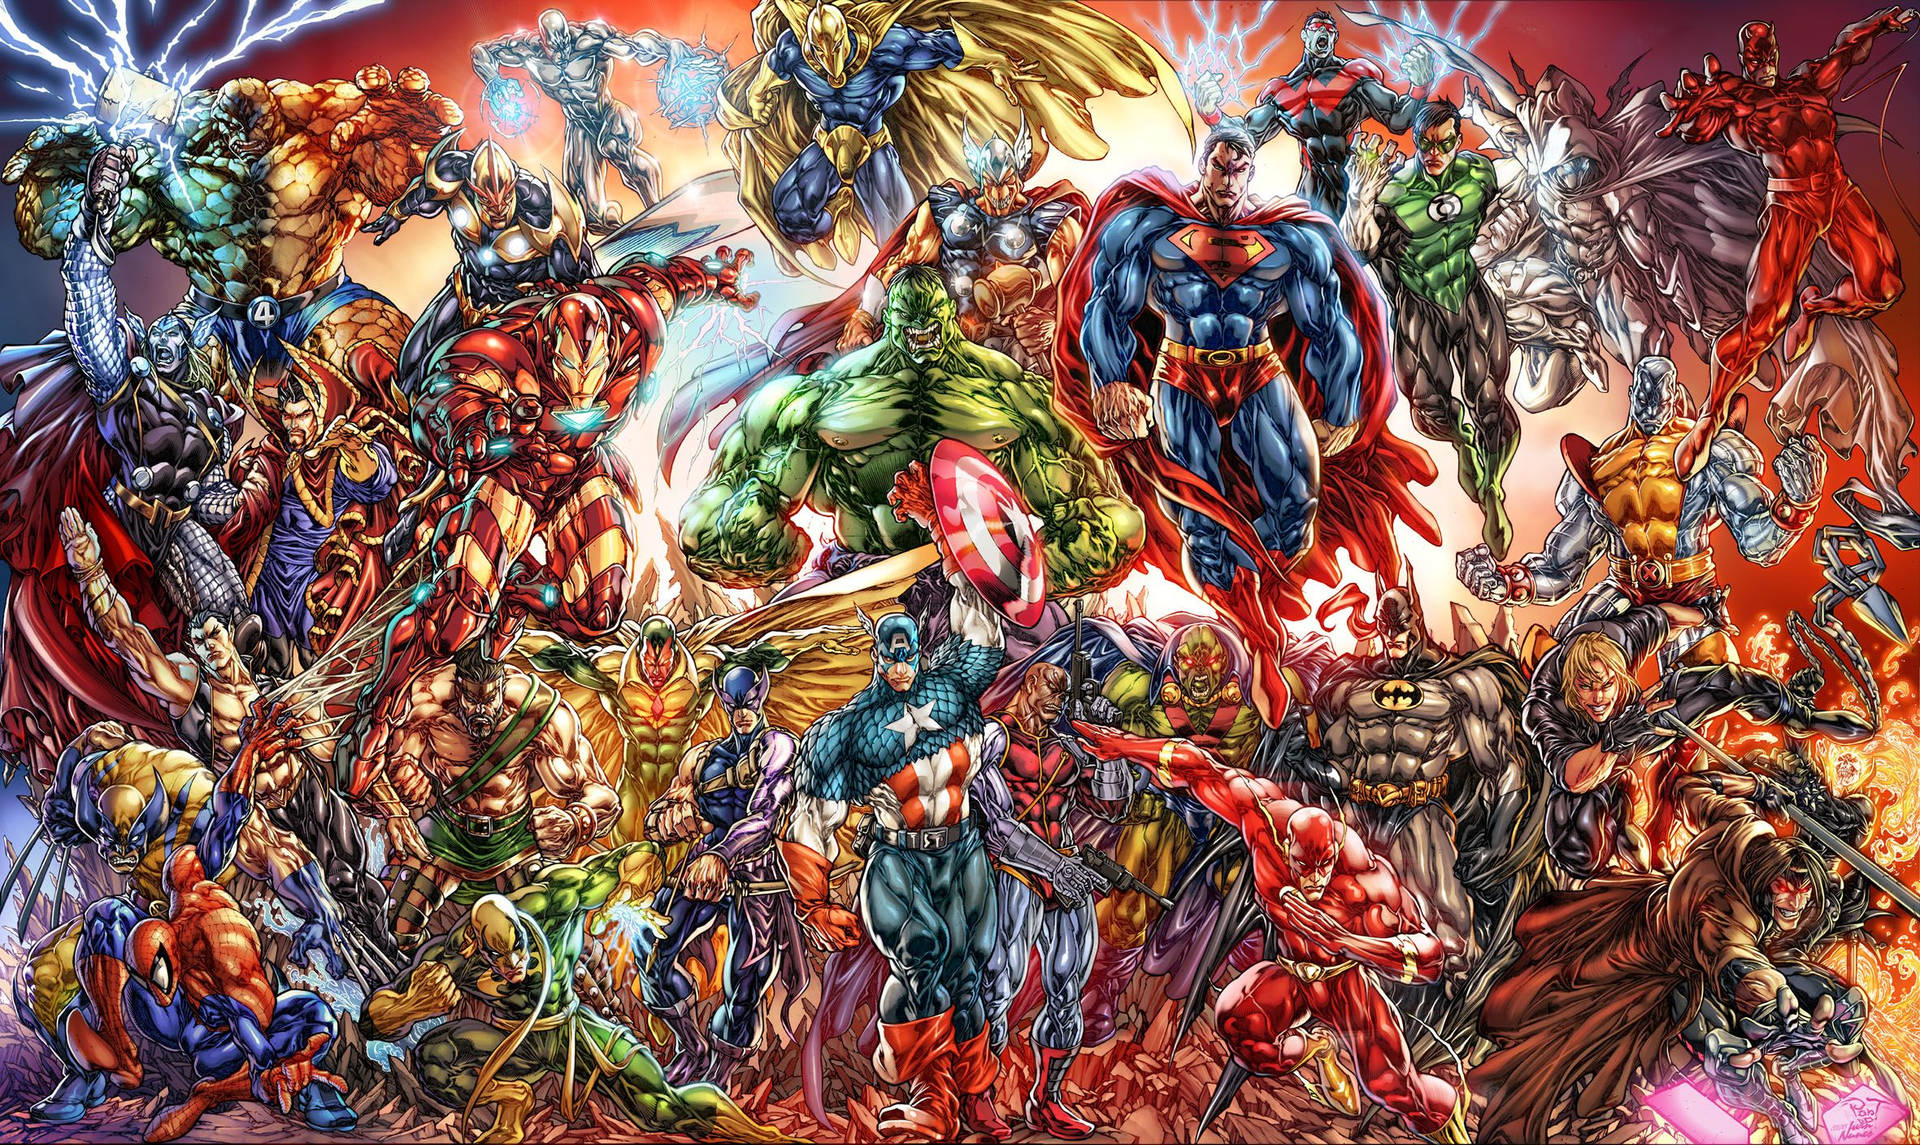 Marvel Comics in bright colors and glowing drawing.